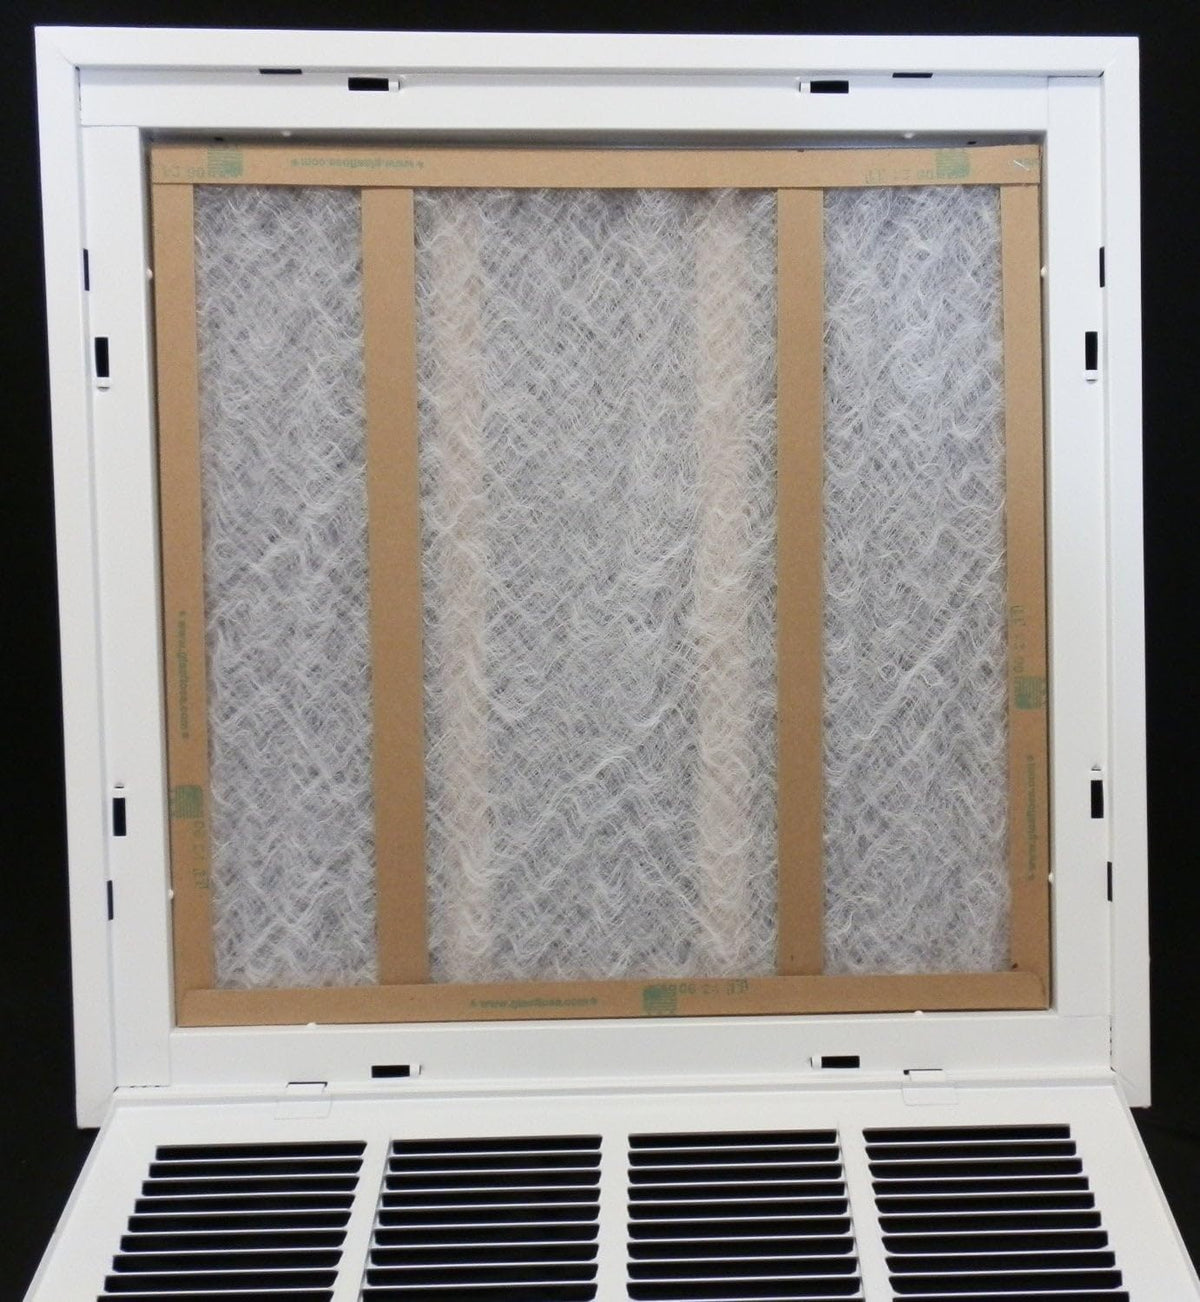 16&quot; X 16&quot; Steel Return Air Filter Grille for 1&quot; Filter - Removable Frame - * Filter Included * [Outer Dimensions: 18 5/8&quot; X 18 5/8&quot;]